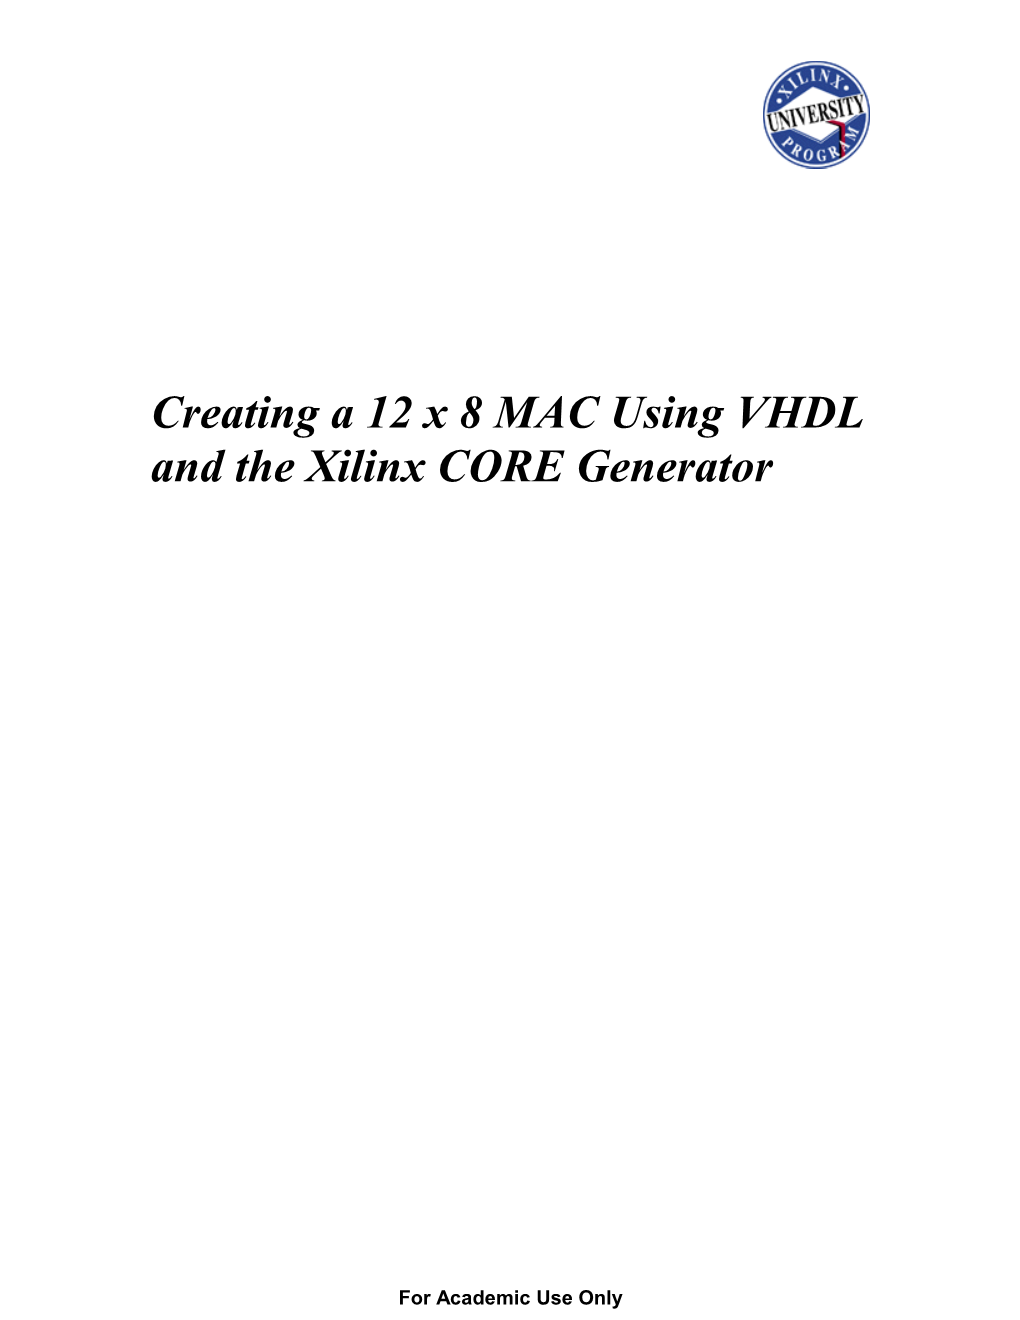 Creating a 12 X 8 MAC Using VHDL and the Xilinx CORE Generator